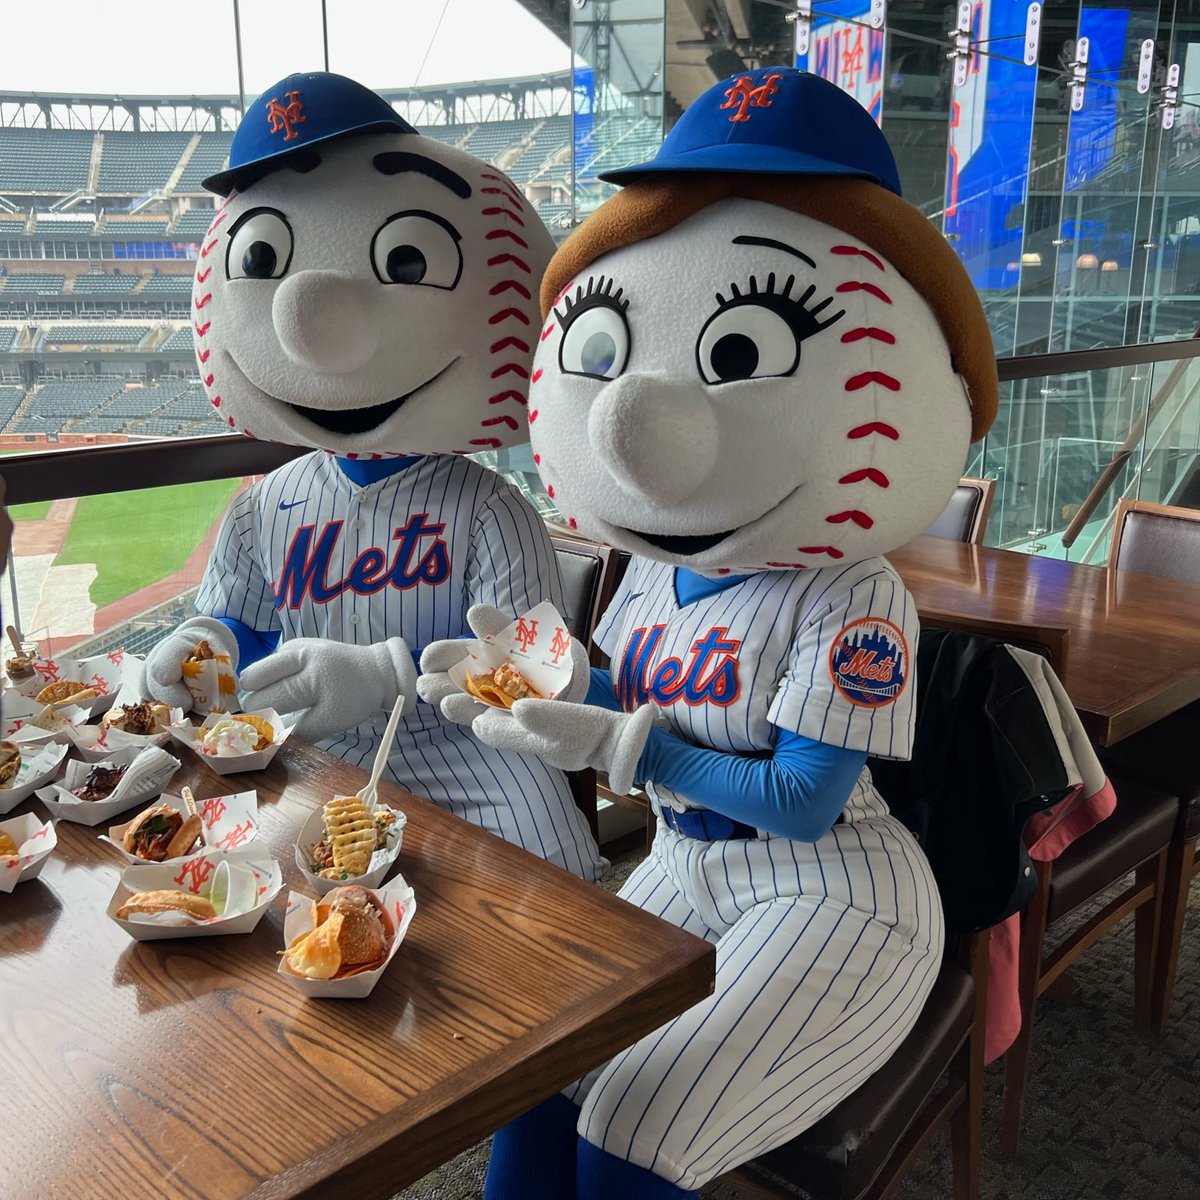 When I’m not dancing on the dugout, I’m enjoying the BEST food in baseball! Vote for @CitiField in USA Today’s 10Best Stadium Food poll!

🍔👉 bit.ly/3YxyDQU